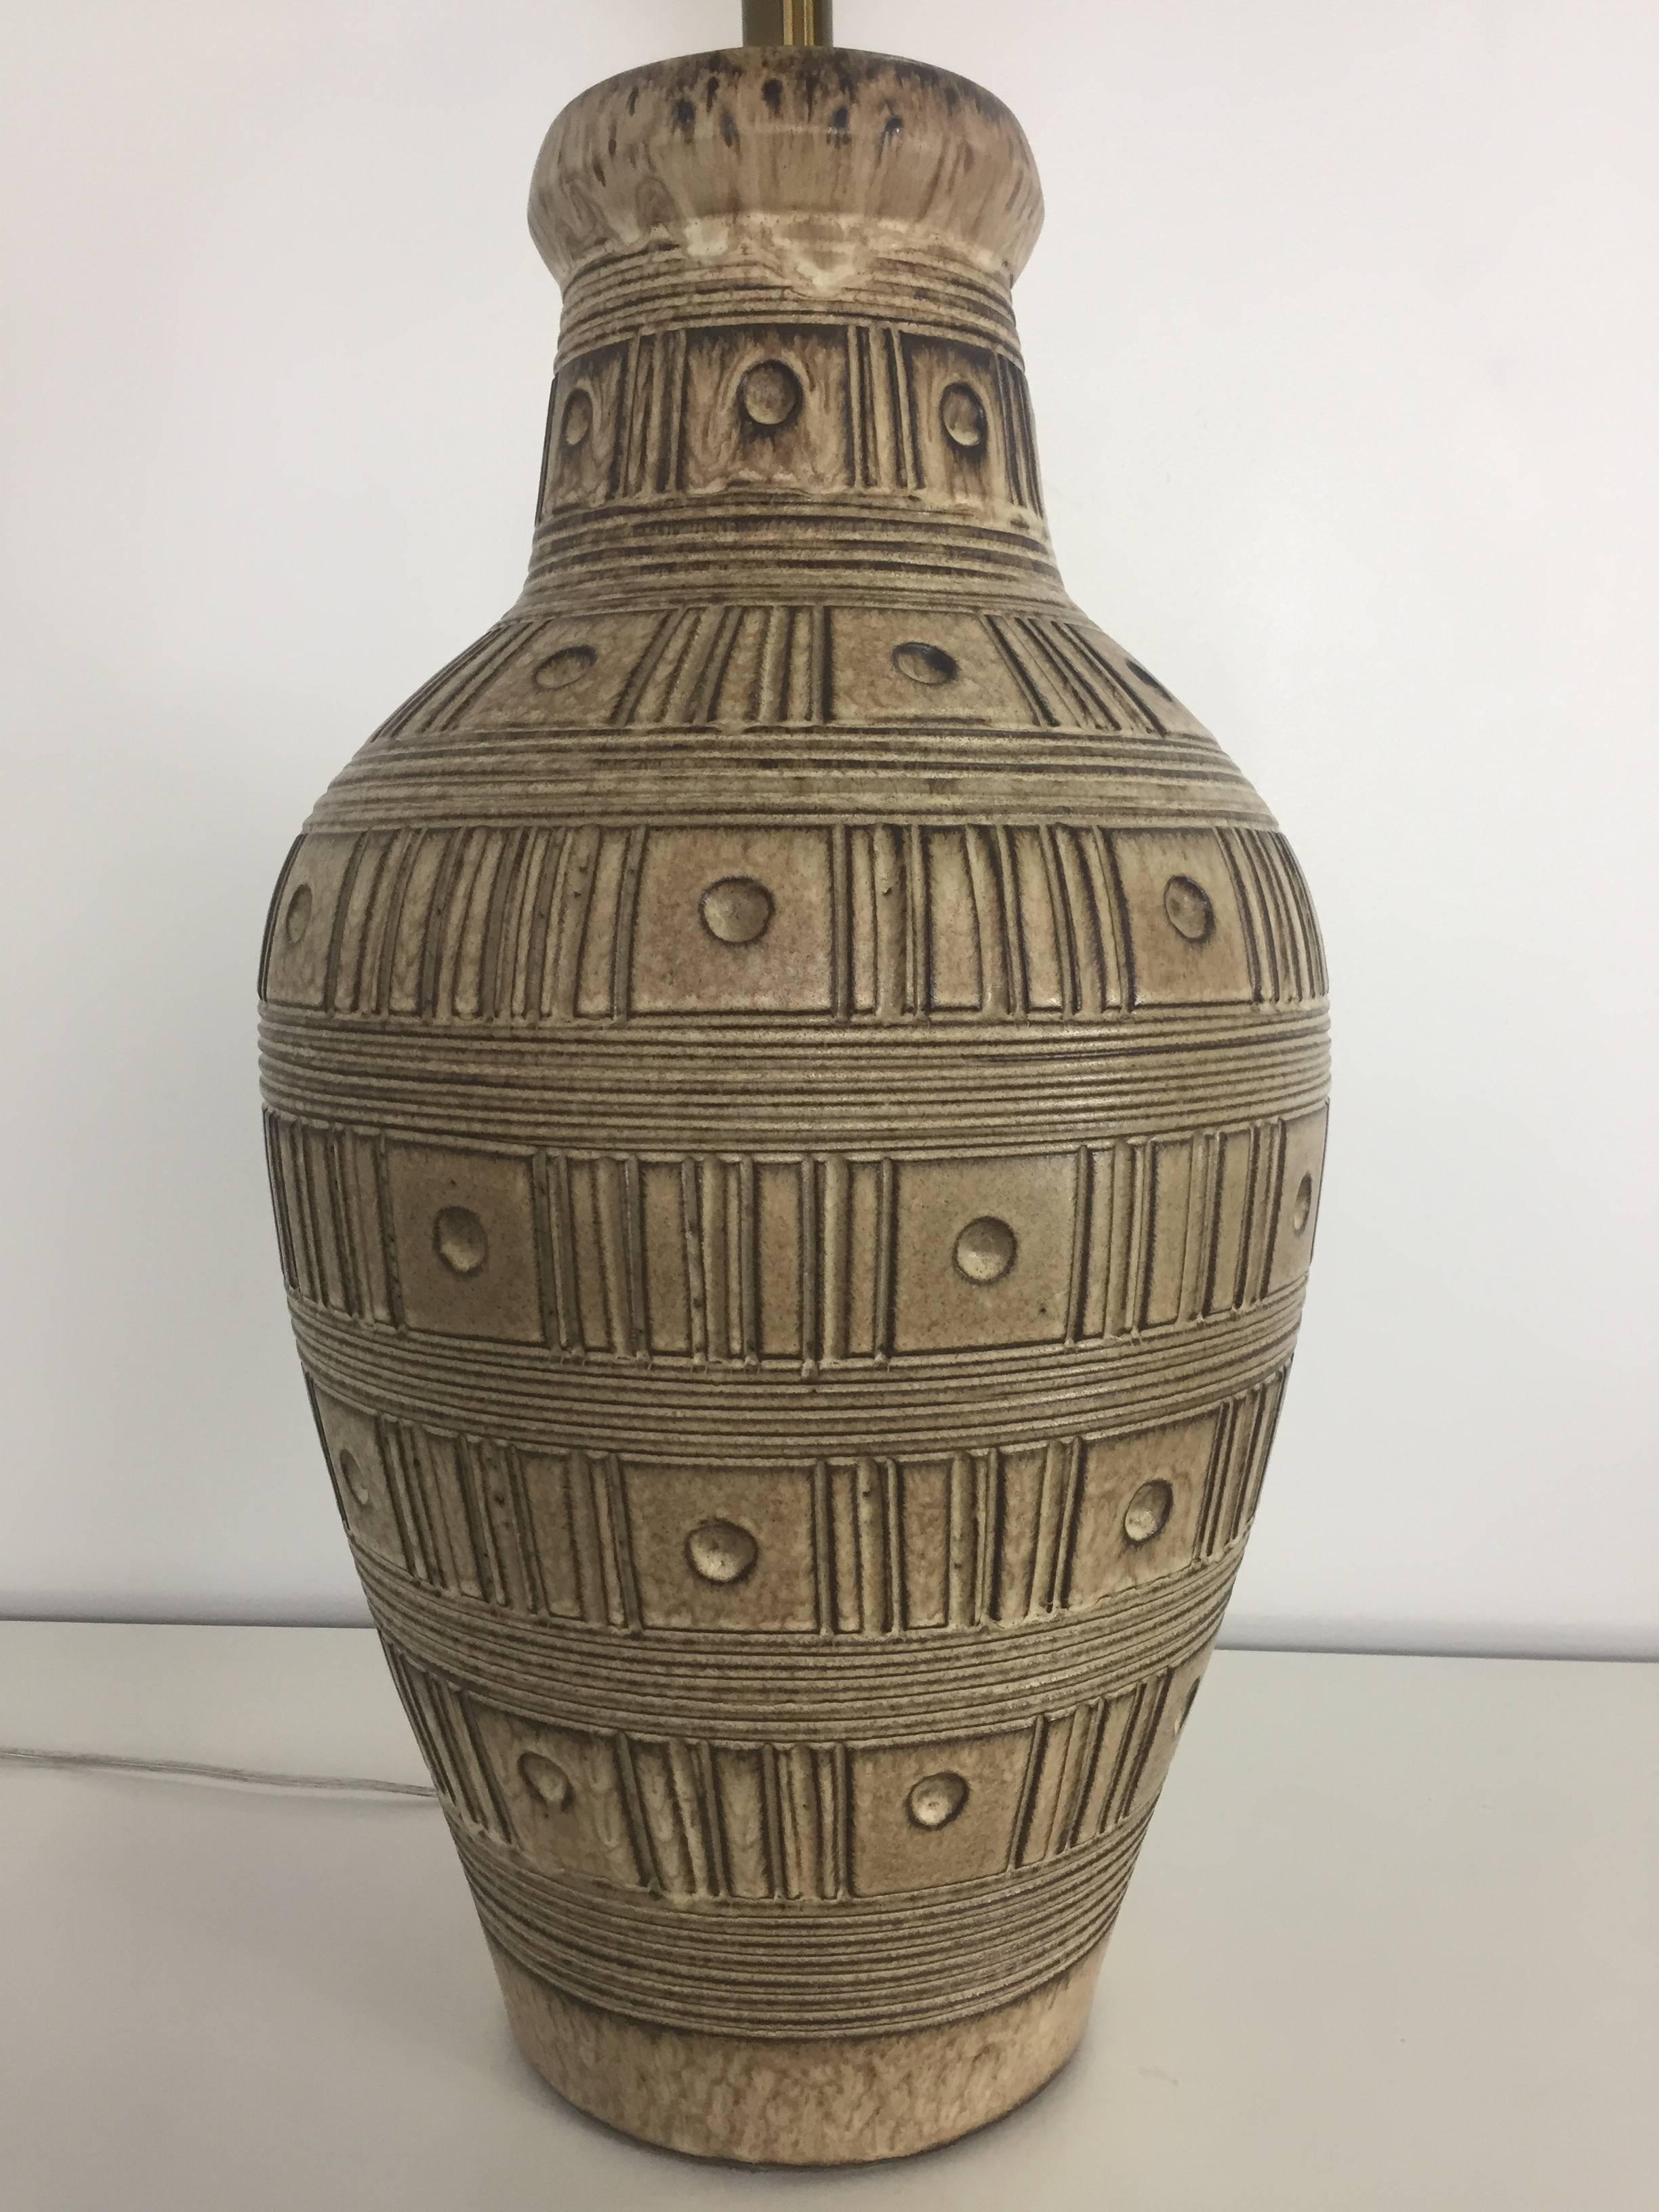 This Design Technics lamp has the Classic Design Technics artful glaze and uniquely incised design on this entire lamp. The lamp is in perfect shape; it is a rare large size.